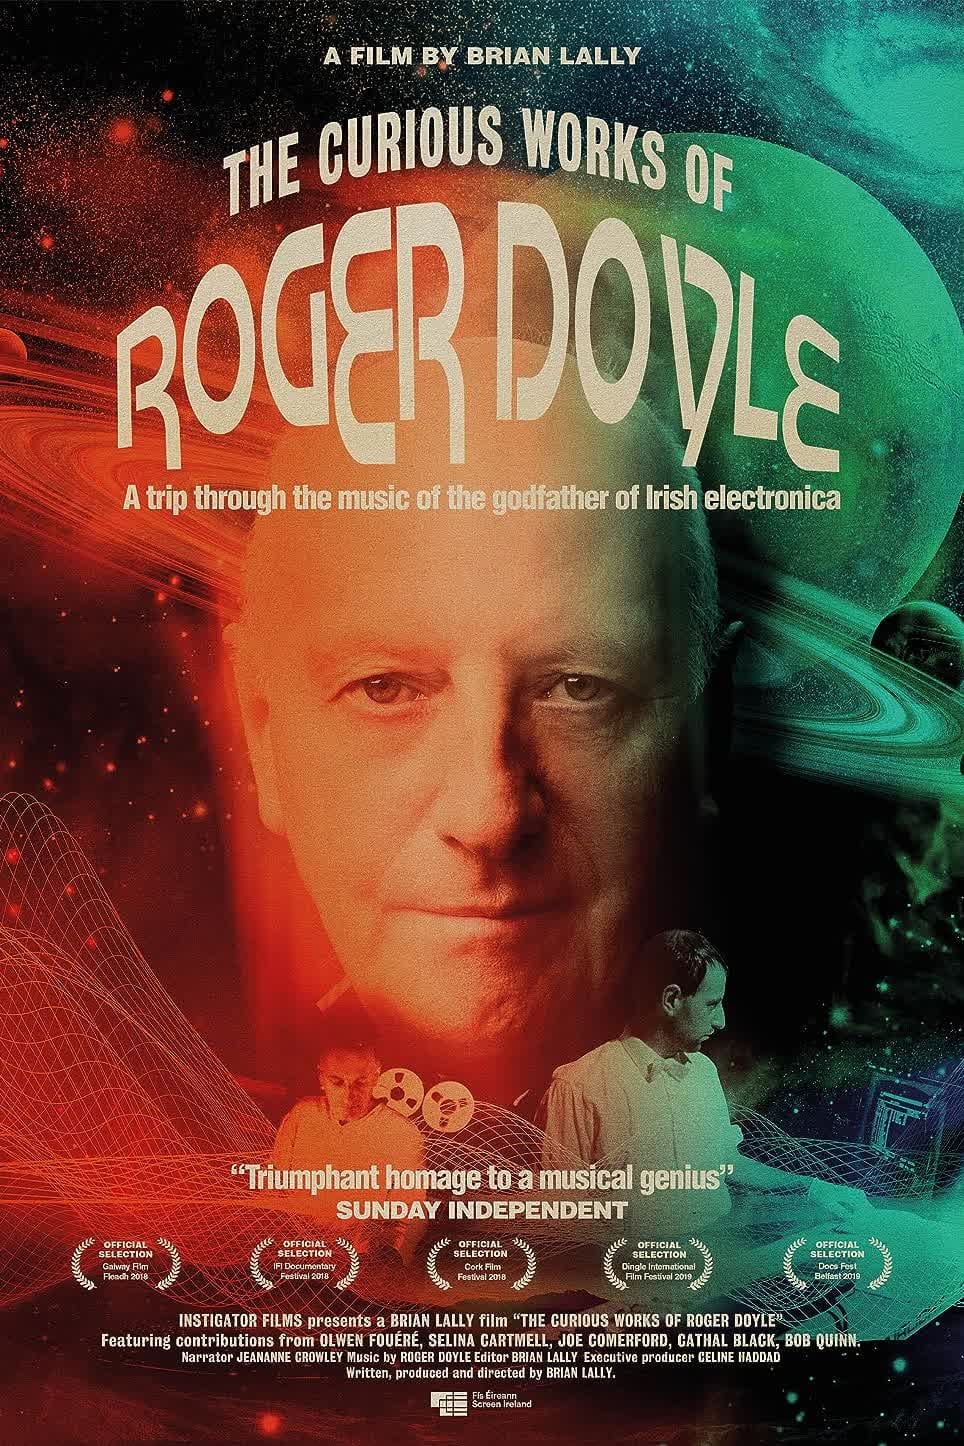 The Curious Works of Roger Doyle